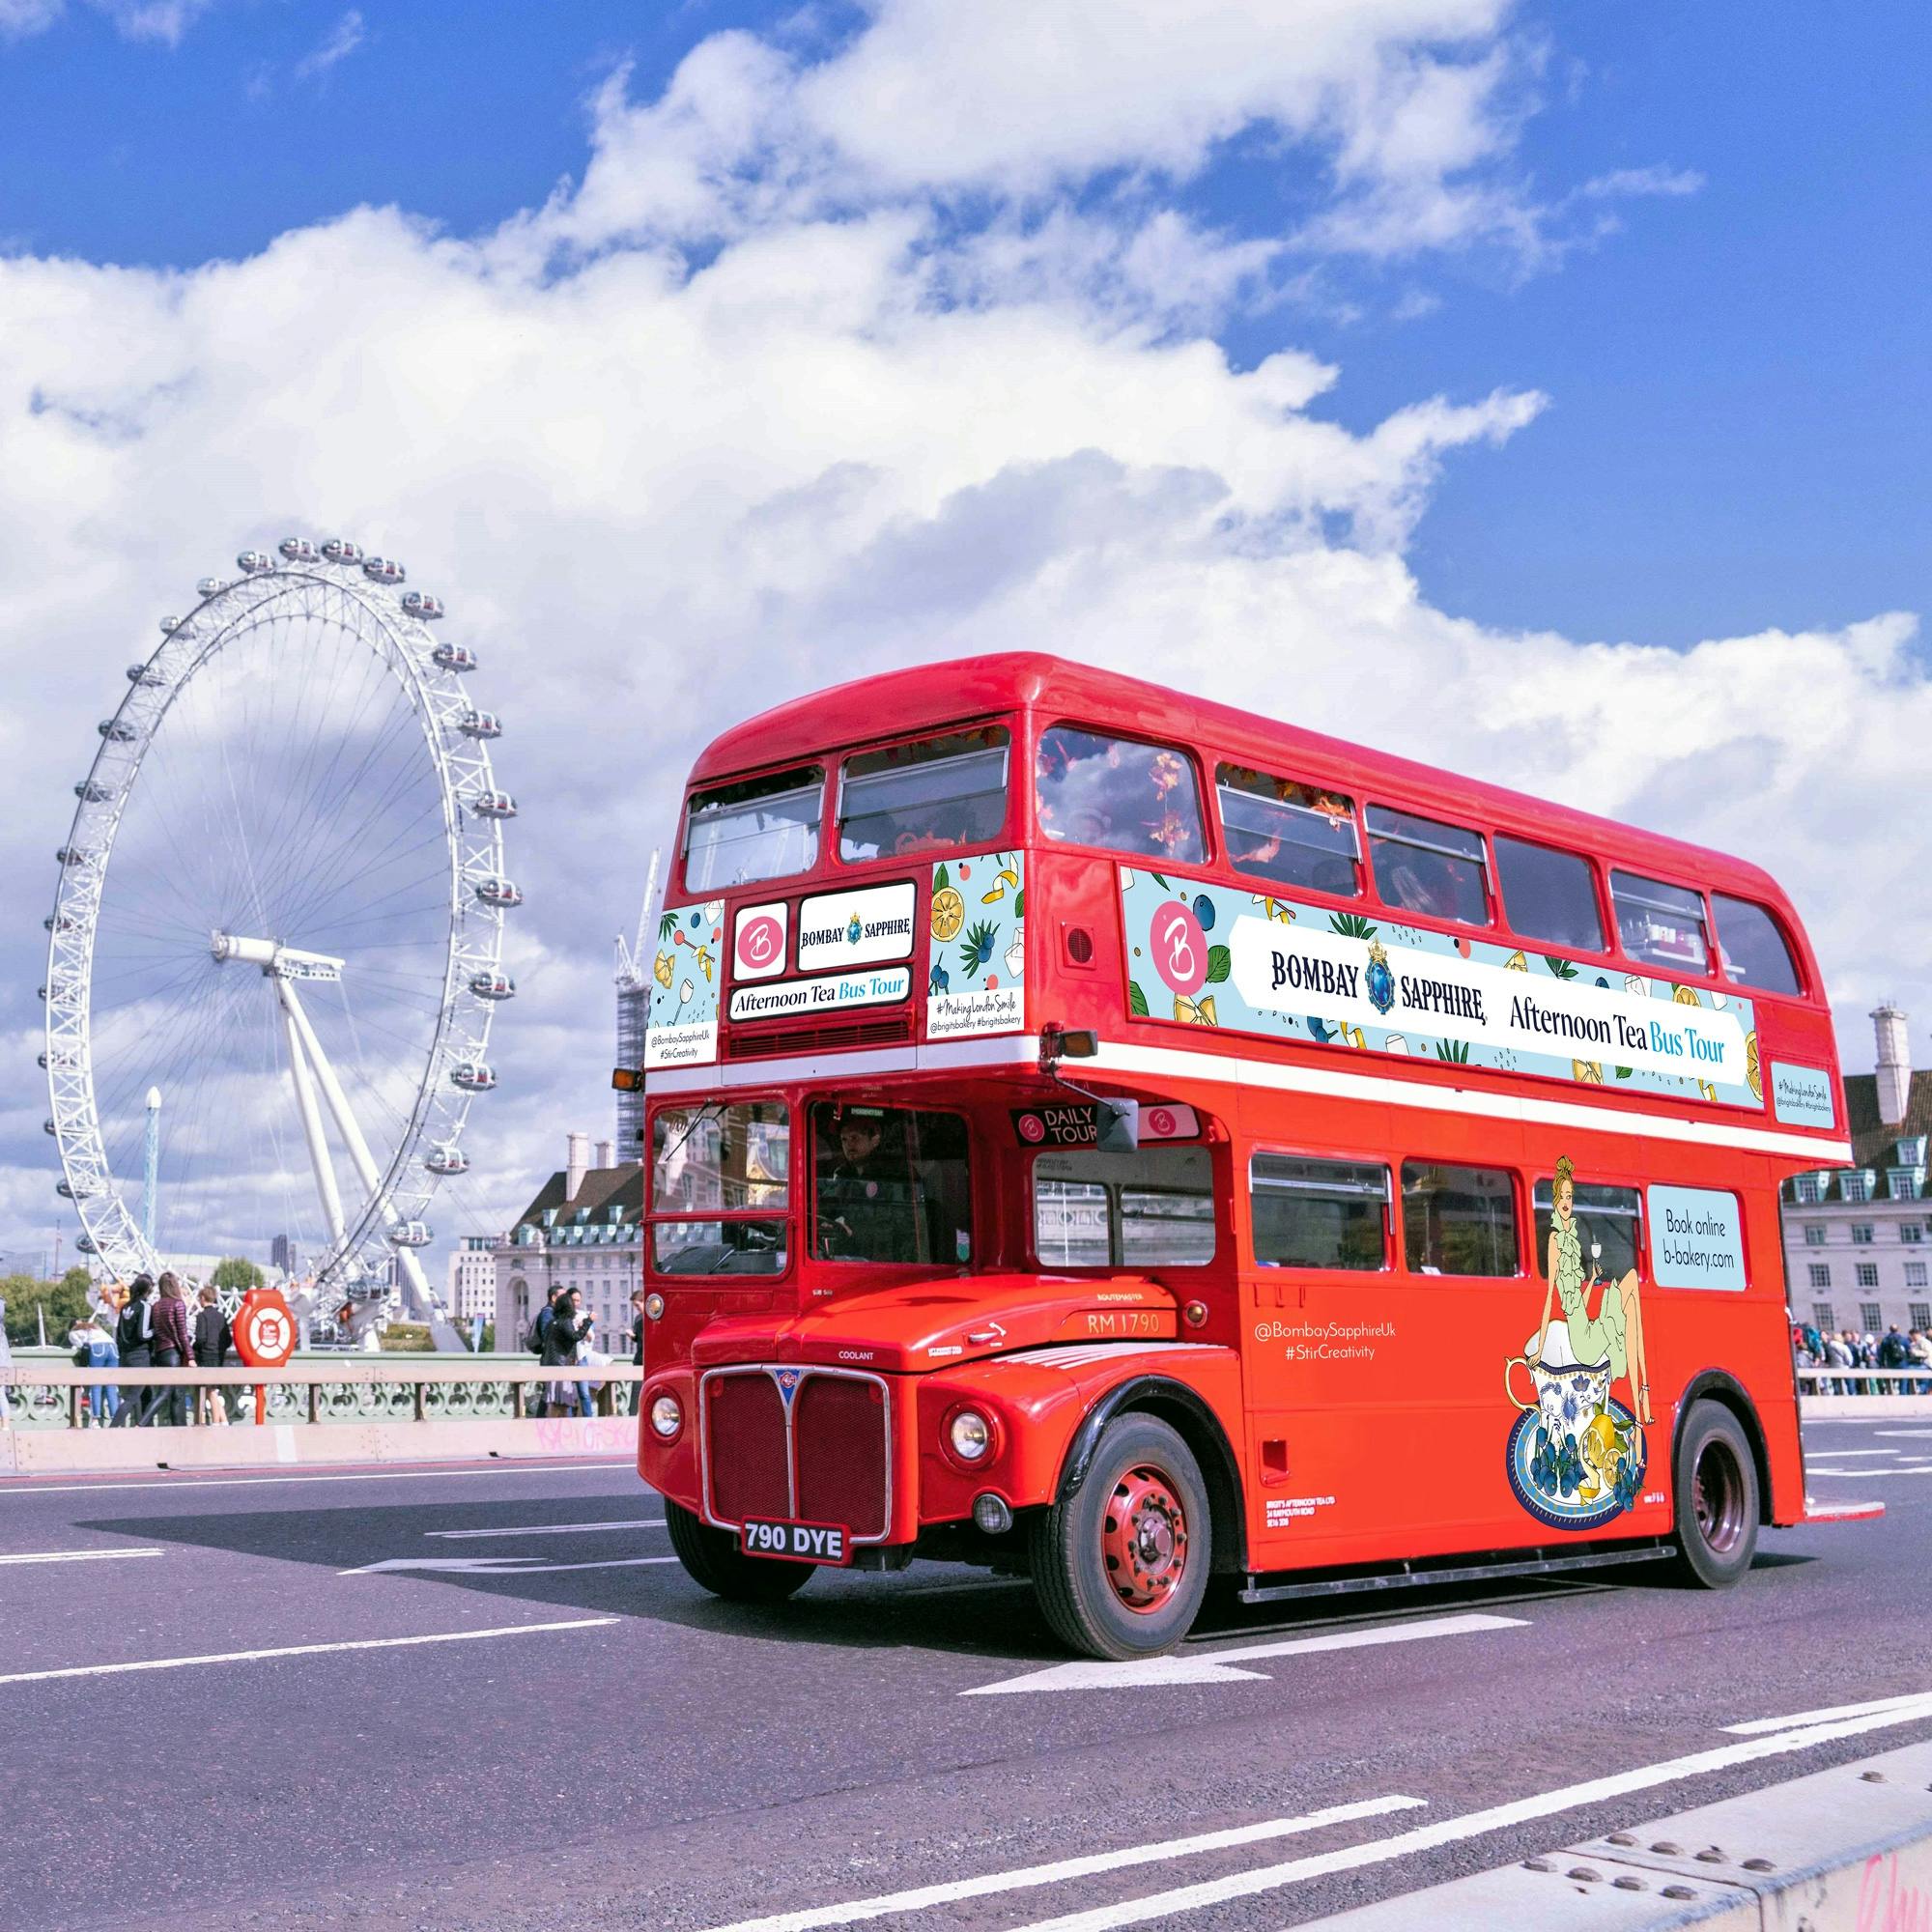 Gin lovers afternoon tea bus tour from Trafalgar Square